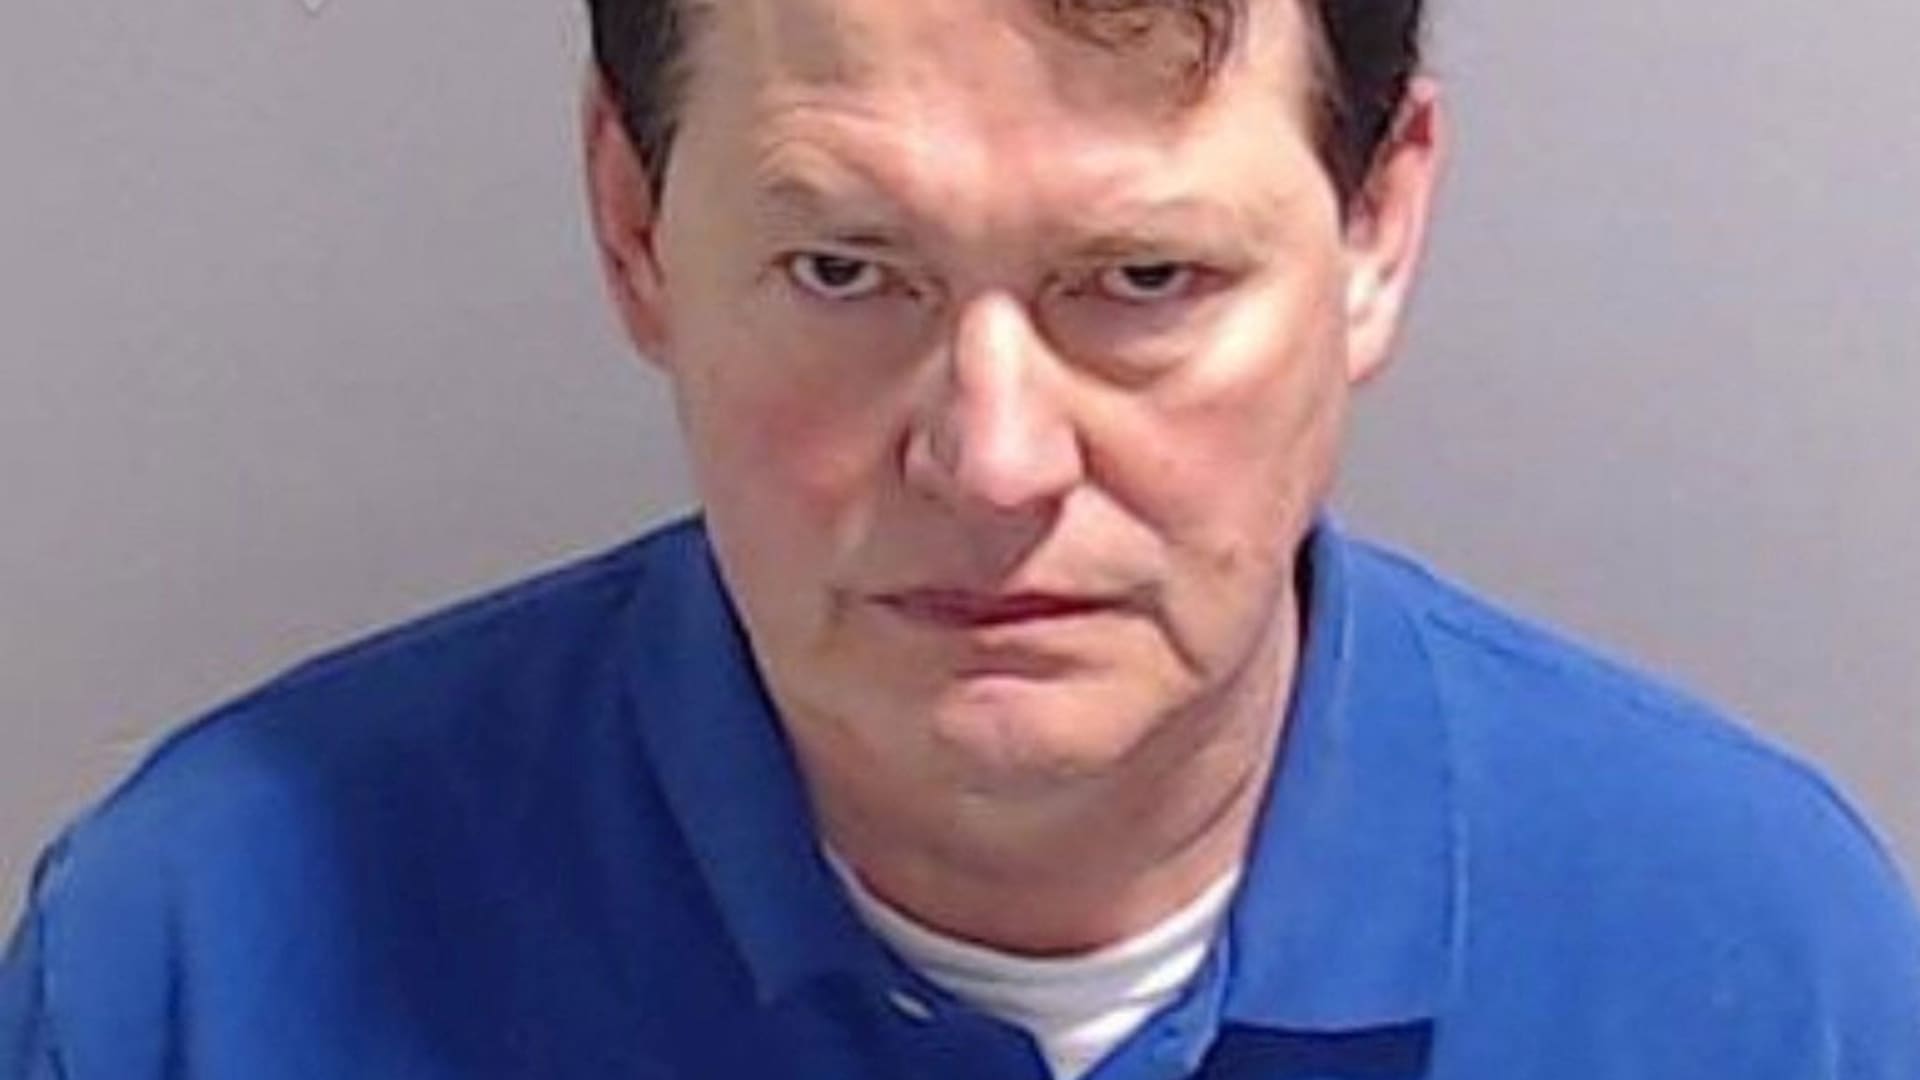 Ray Smith, a lawyer who previously represented former U.S. President Donald Trump in Georgia, is shown in a police booking mugshot released by the Fulton County Sheriff's Office, Atlanta, Aug. 23, 2023.